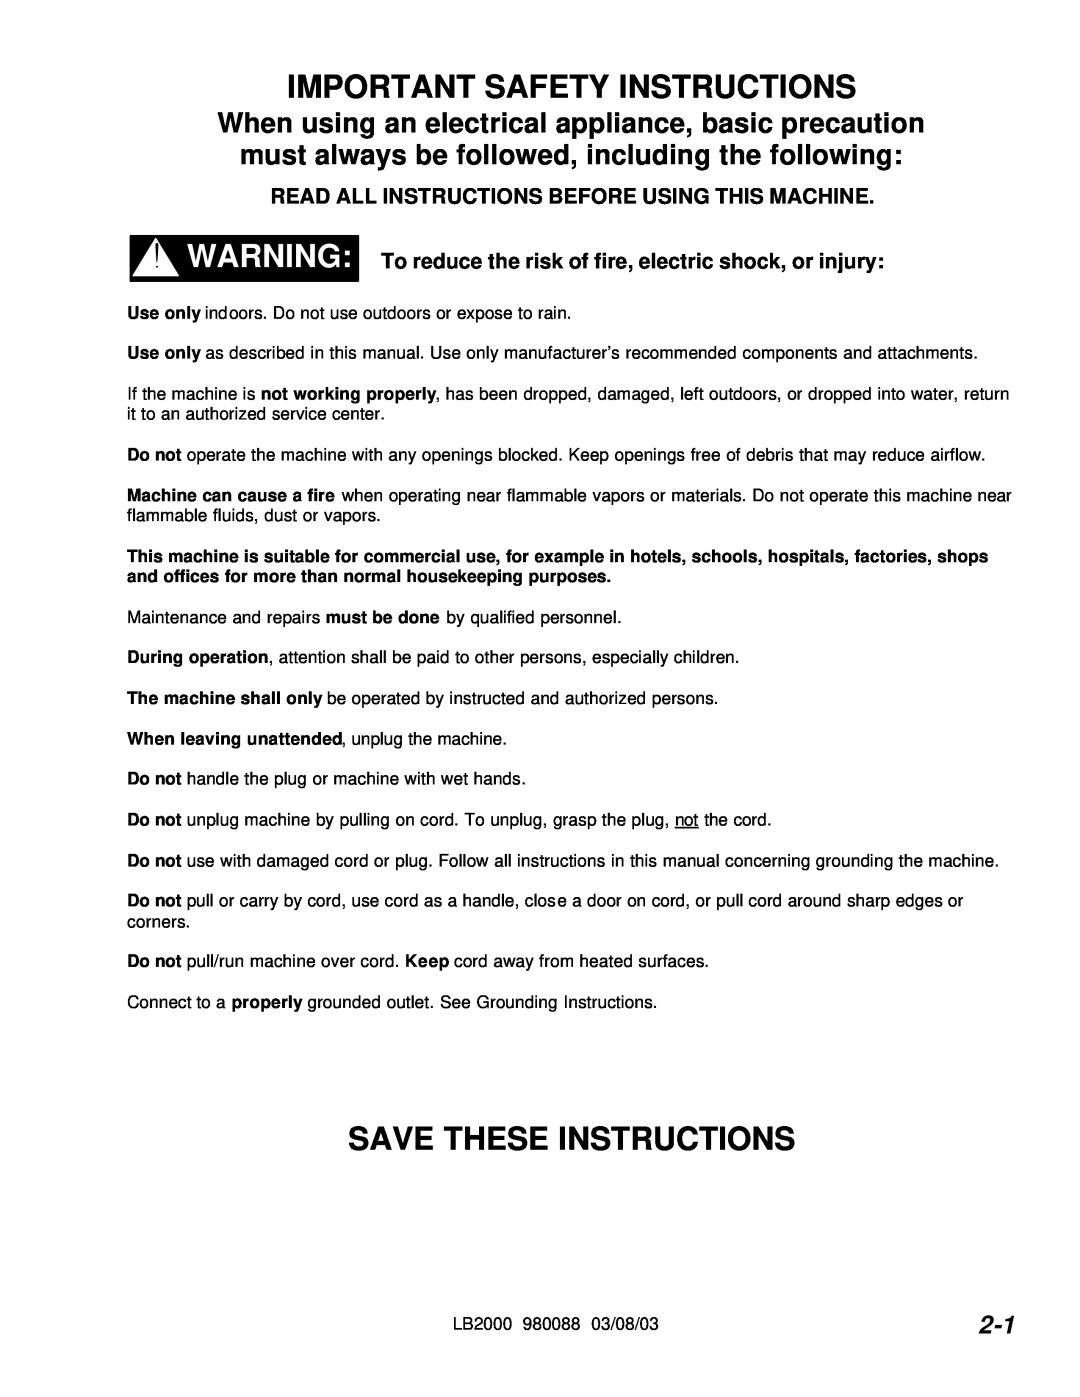 Windsor LB2000 Important Safety Instructions, Save These Instructions, Read All Instructions Before Using This Machine 